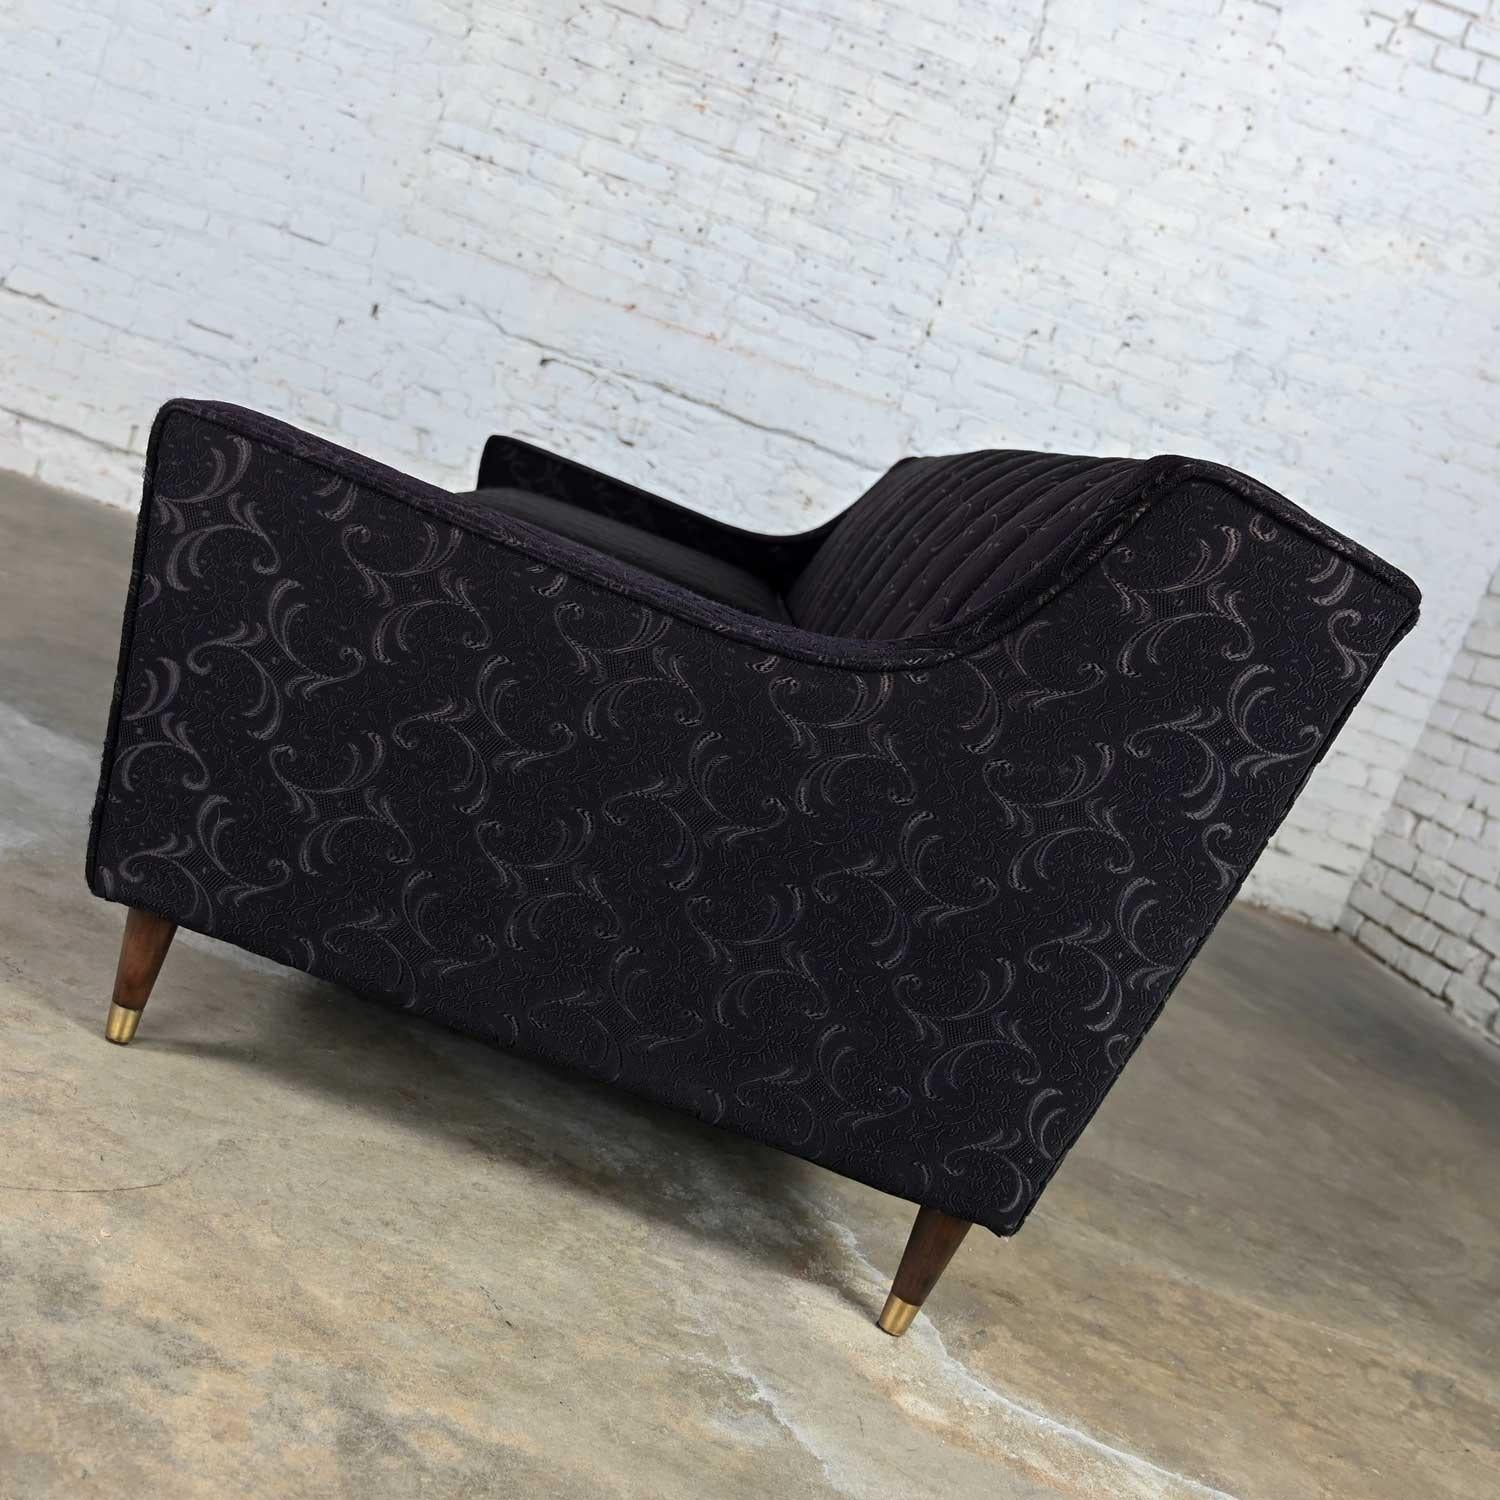 Mid-Century Modern Modified Lawson Style Sofa Black Frieze Fabric & Channel Back For Sale 2